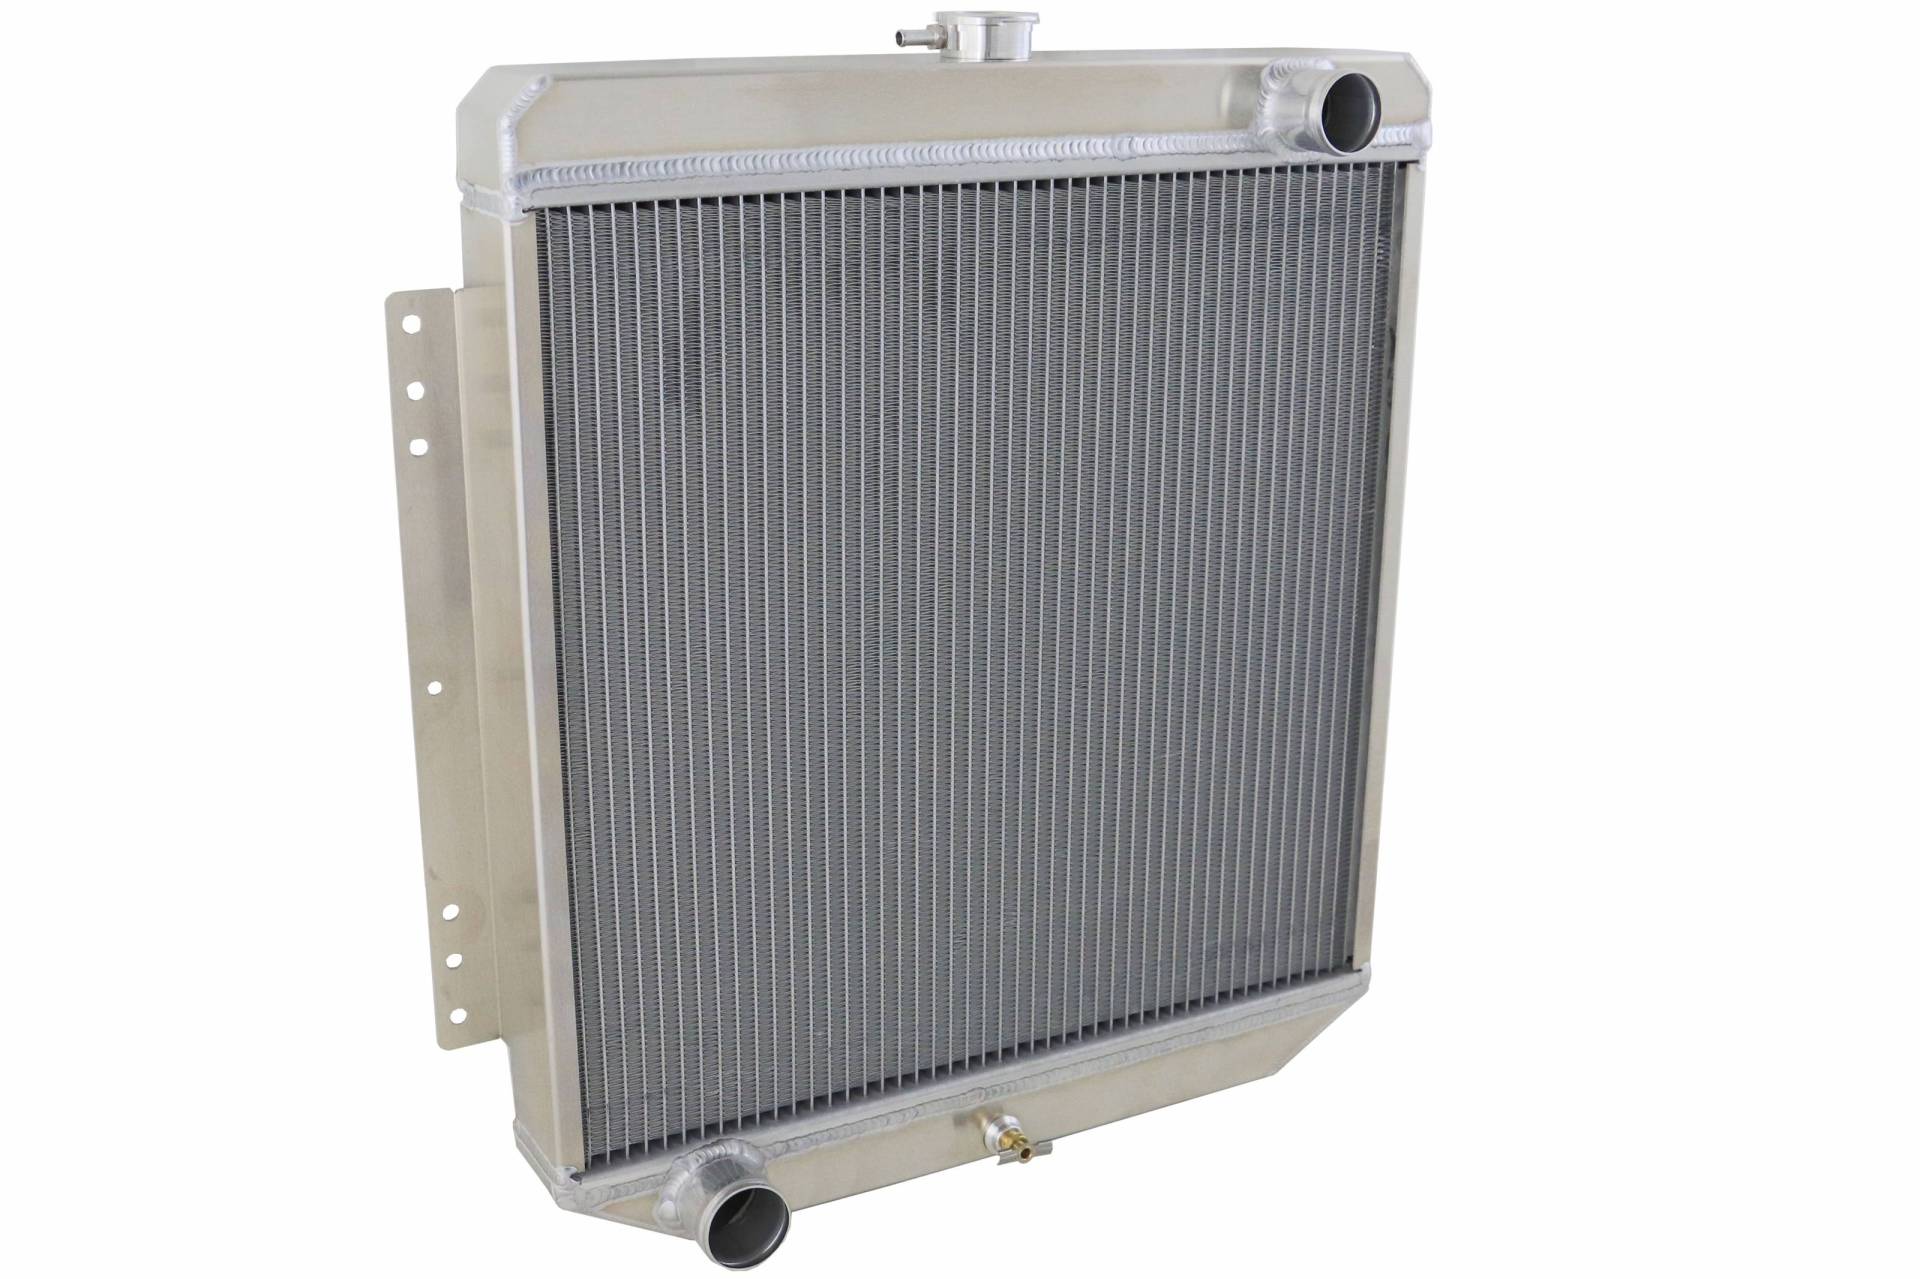 Wizard Cooling Inc - Wizard Cooling - 1956-57 Lincoln Aluminum Radiator - 41000-200